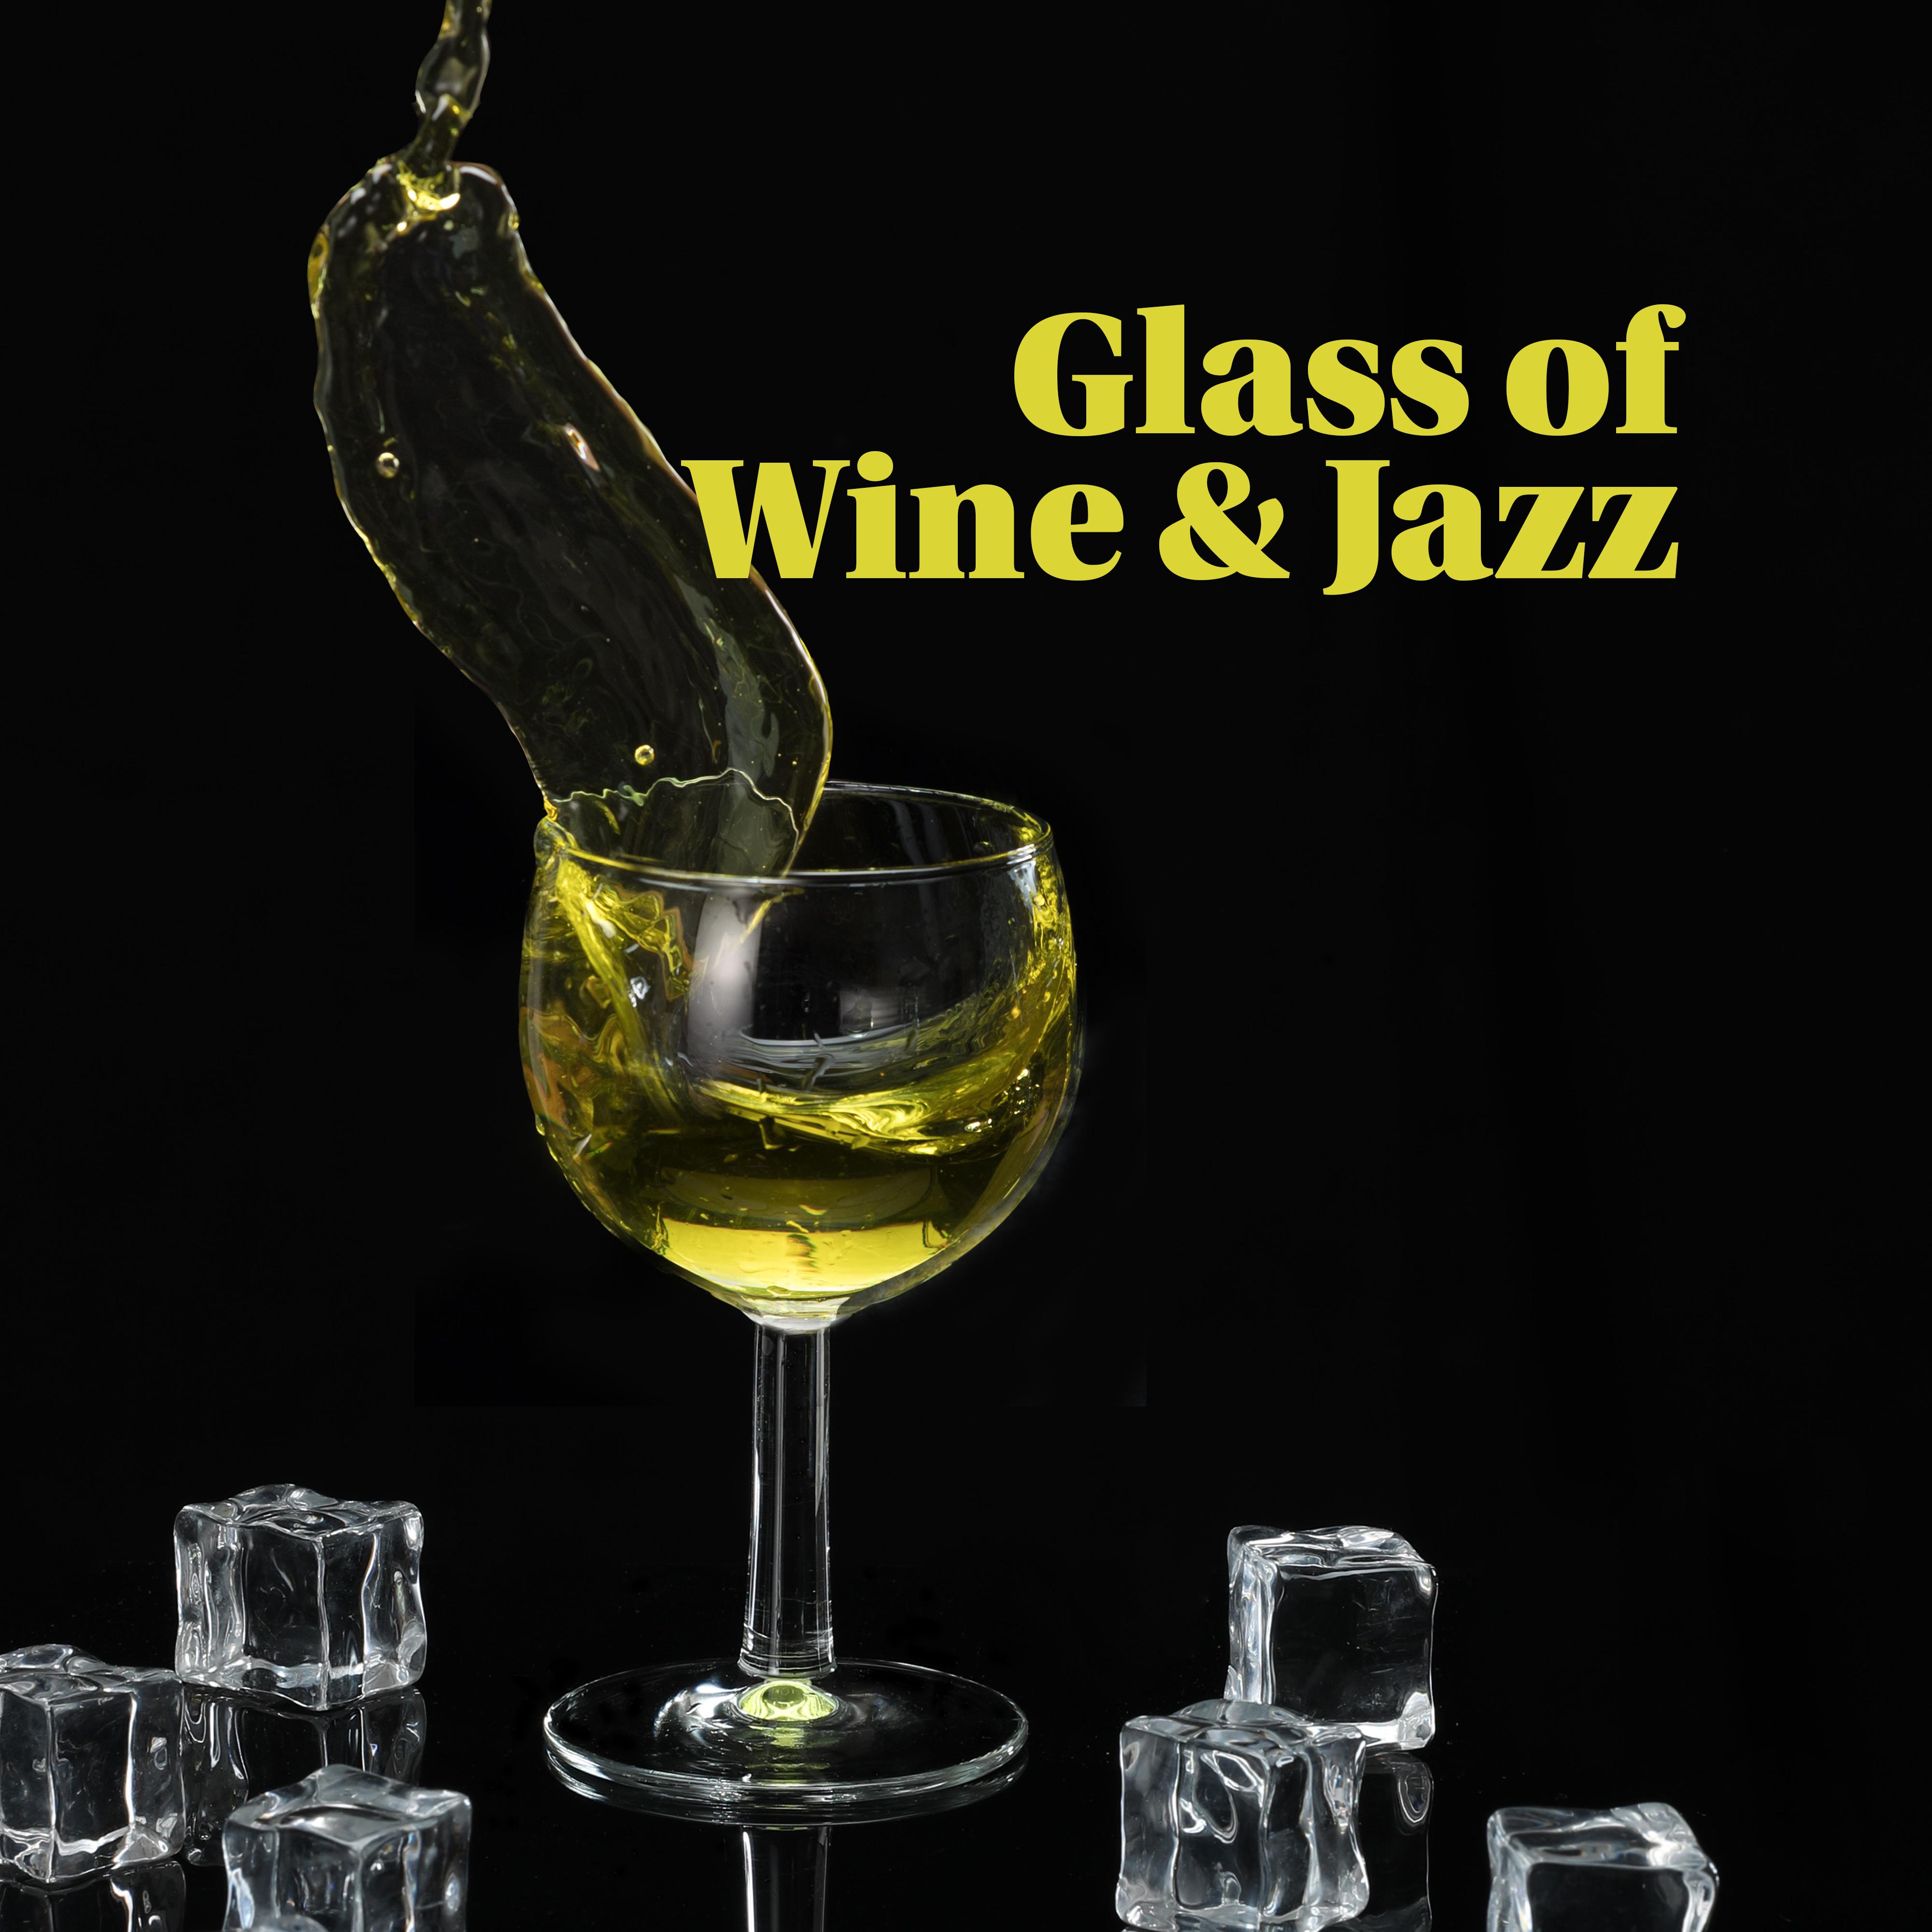 Glass of Wine & Jazz - the Perfect Duo for Evening Relaxation, a Moment Just for Yourself or As a Set for an Exquisite and Romantic Dinner